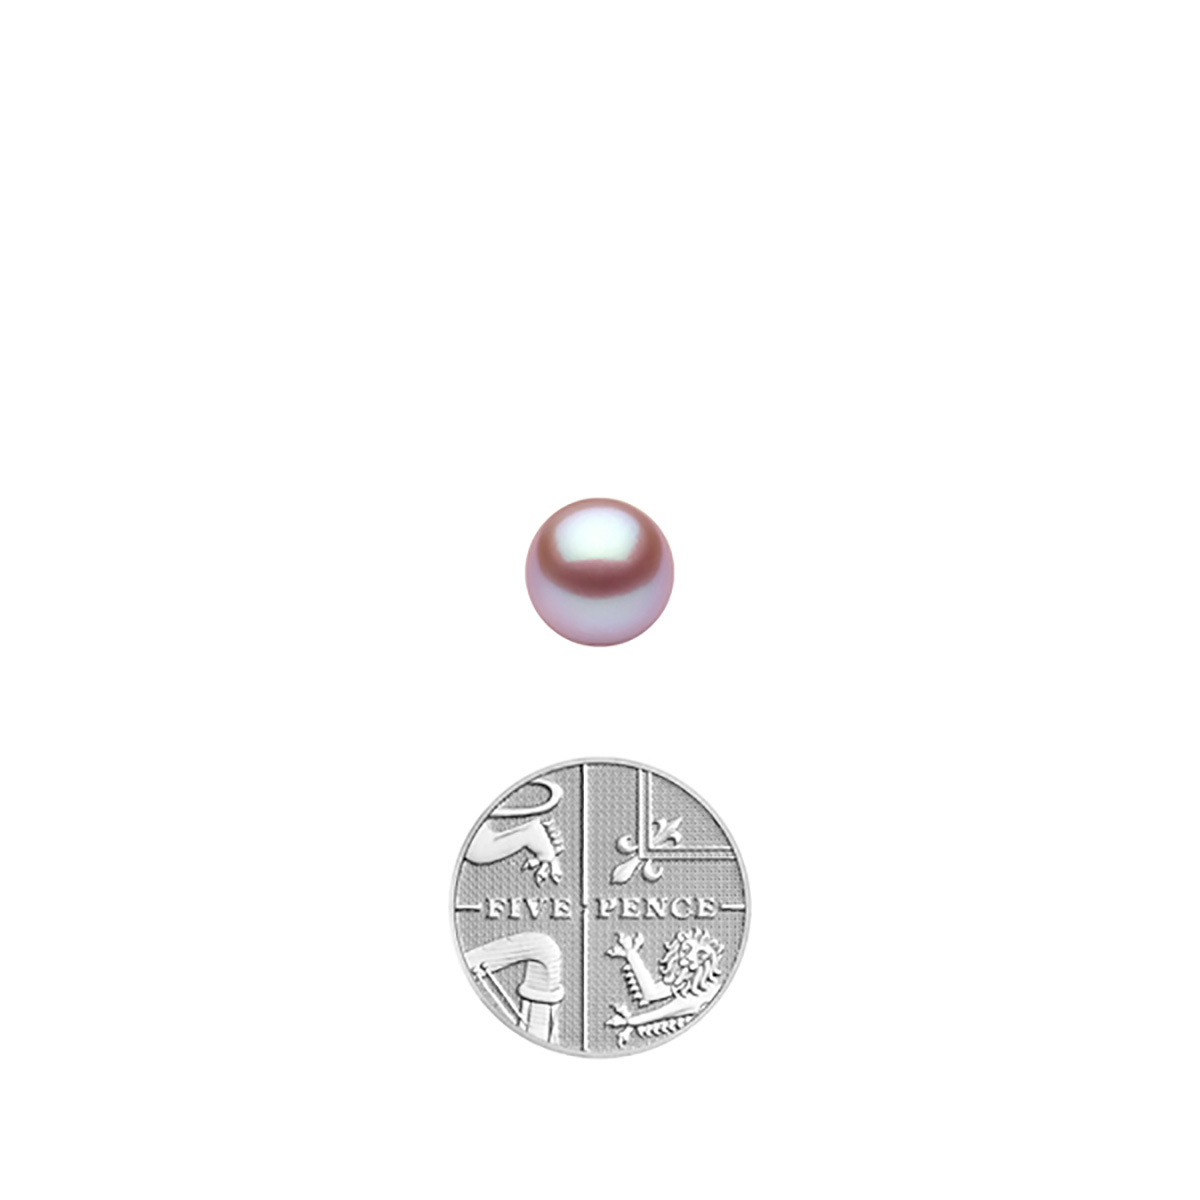 9-9.5mm Cultured Freshwater Pink Pearl Stud Earrings, 18ct Yellow Gold